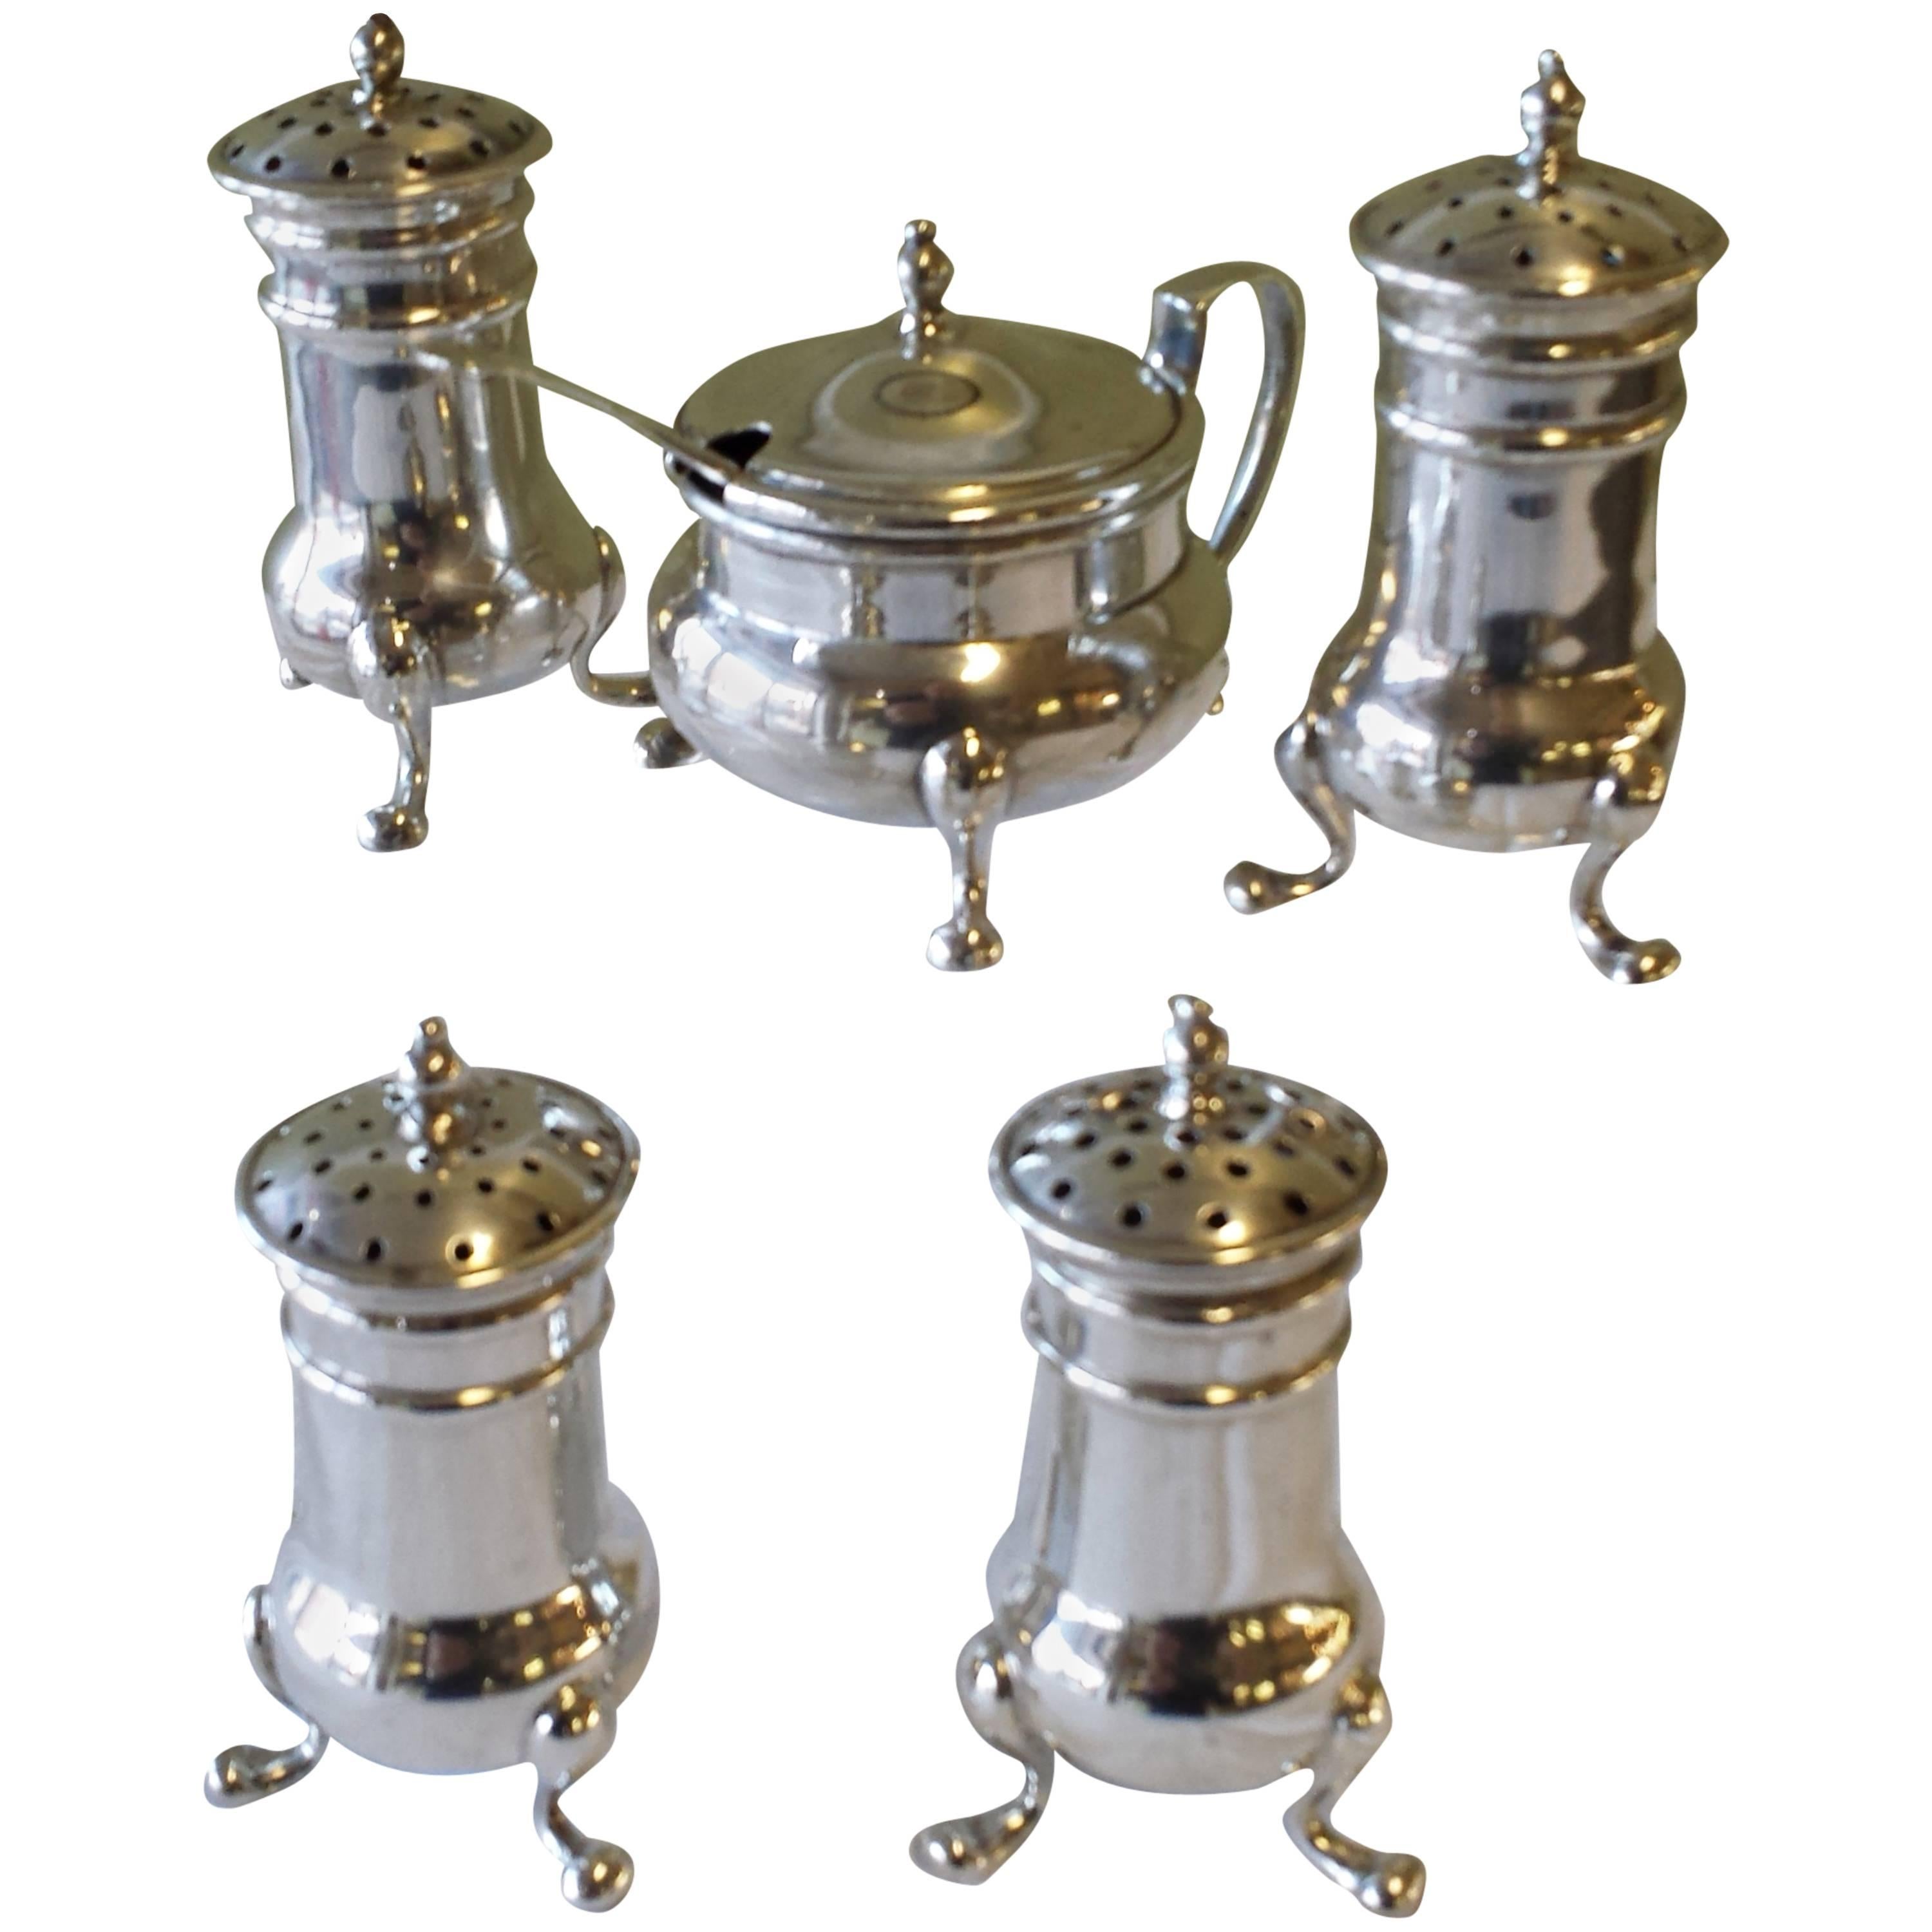 Five-Piece Sterling Silver Condiment Set and Spoon Retailed by Birks